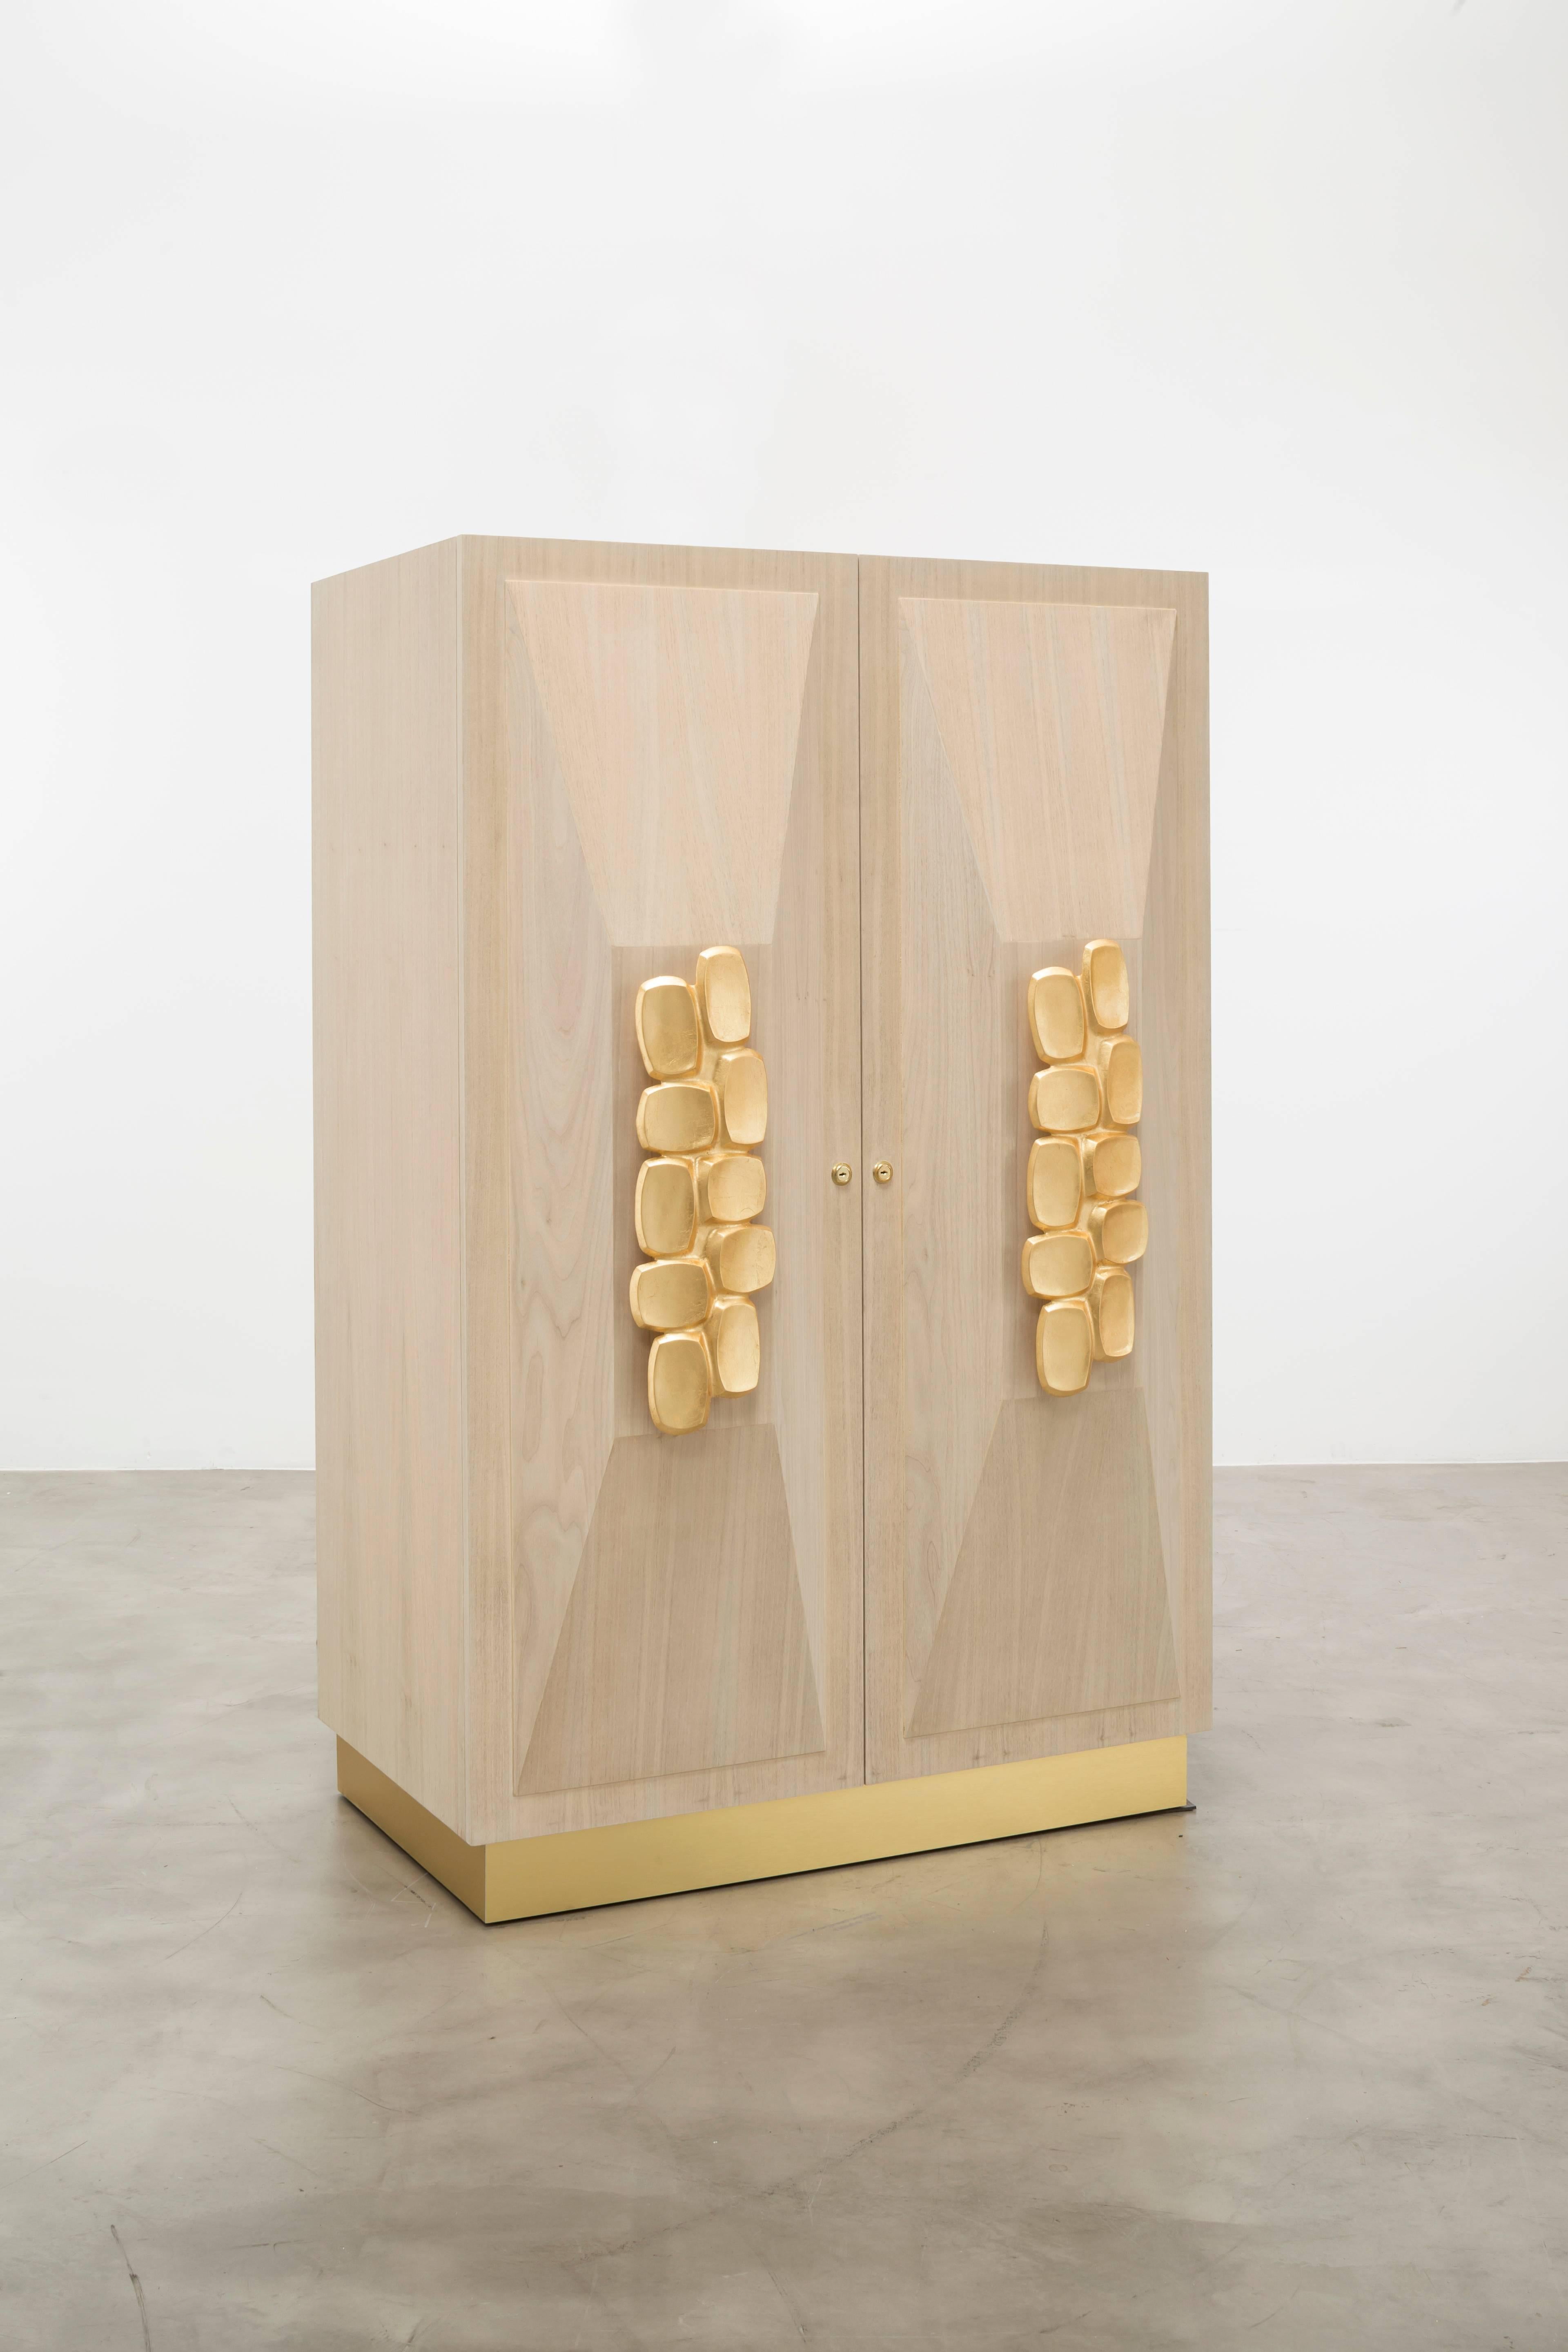 The Faustine jewelry cabinet features a bleached walnut body with hand-carved walnut applique door details and hand-forged leafed handles perfect to store all your most precious and expensive jewels, watches and keepsakes. This cabinet locks for